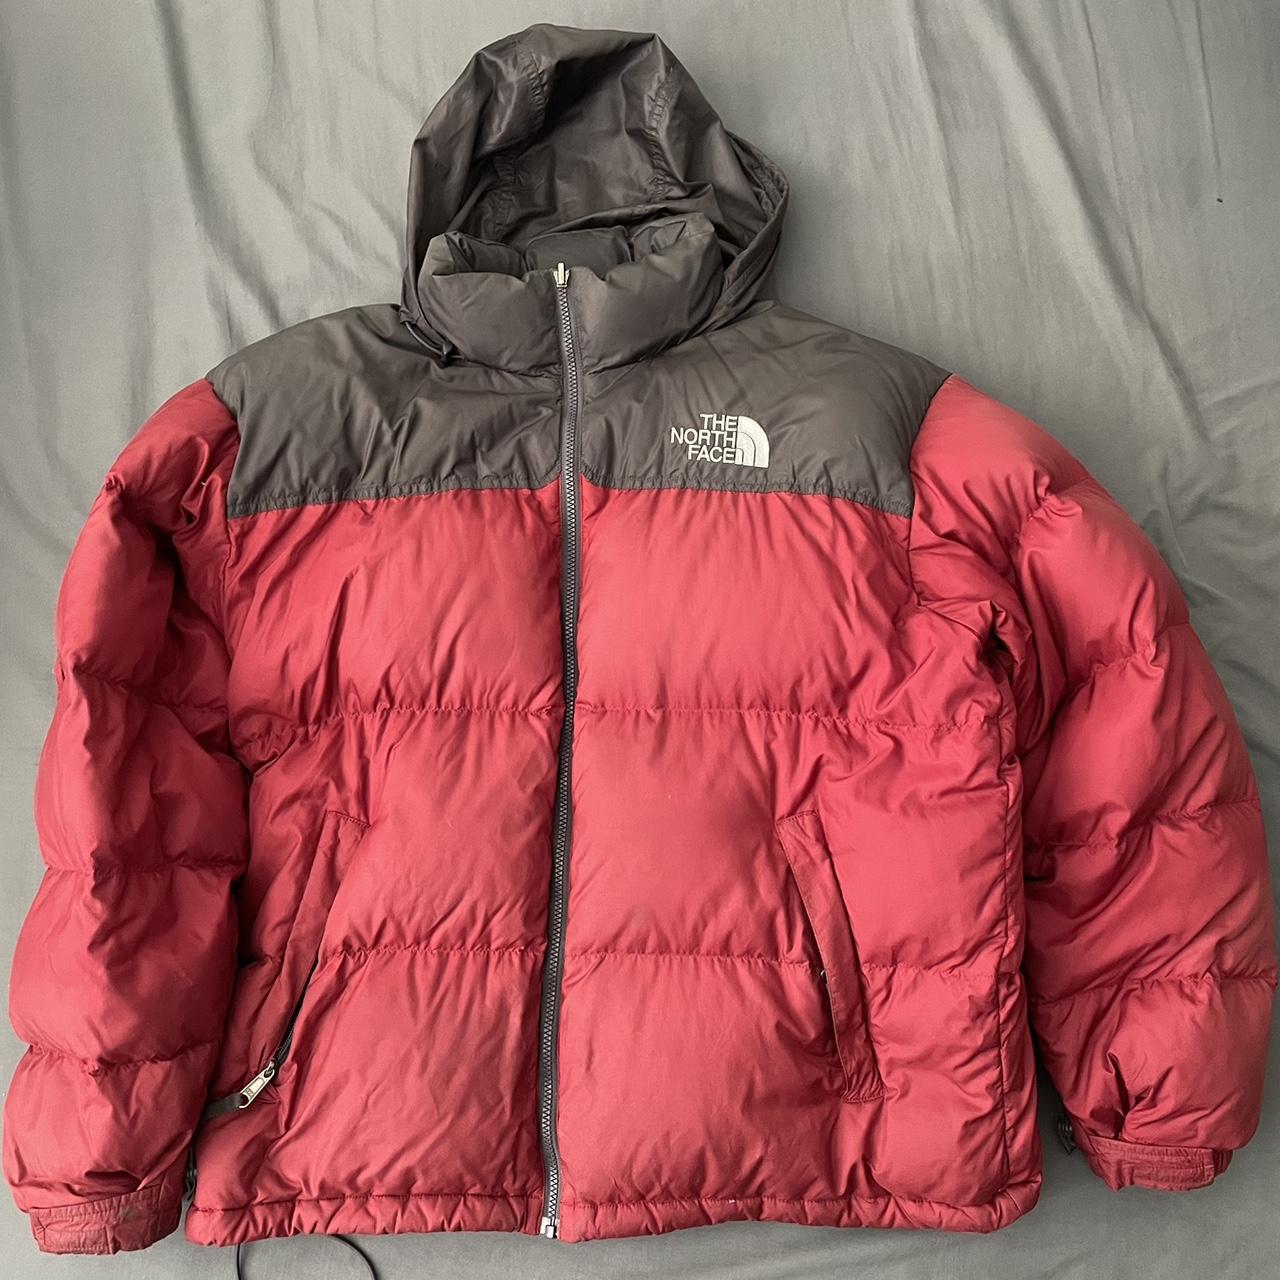 The North Face red puffer jacket - Depop